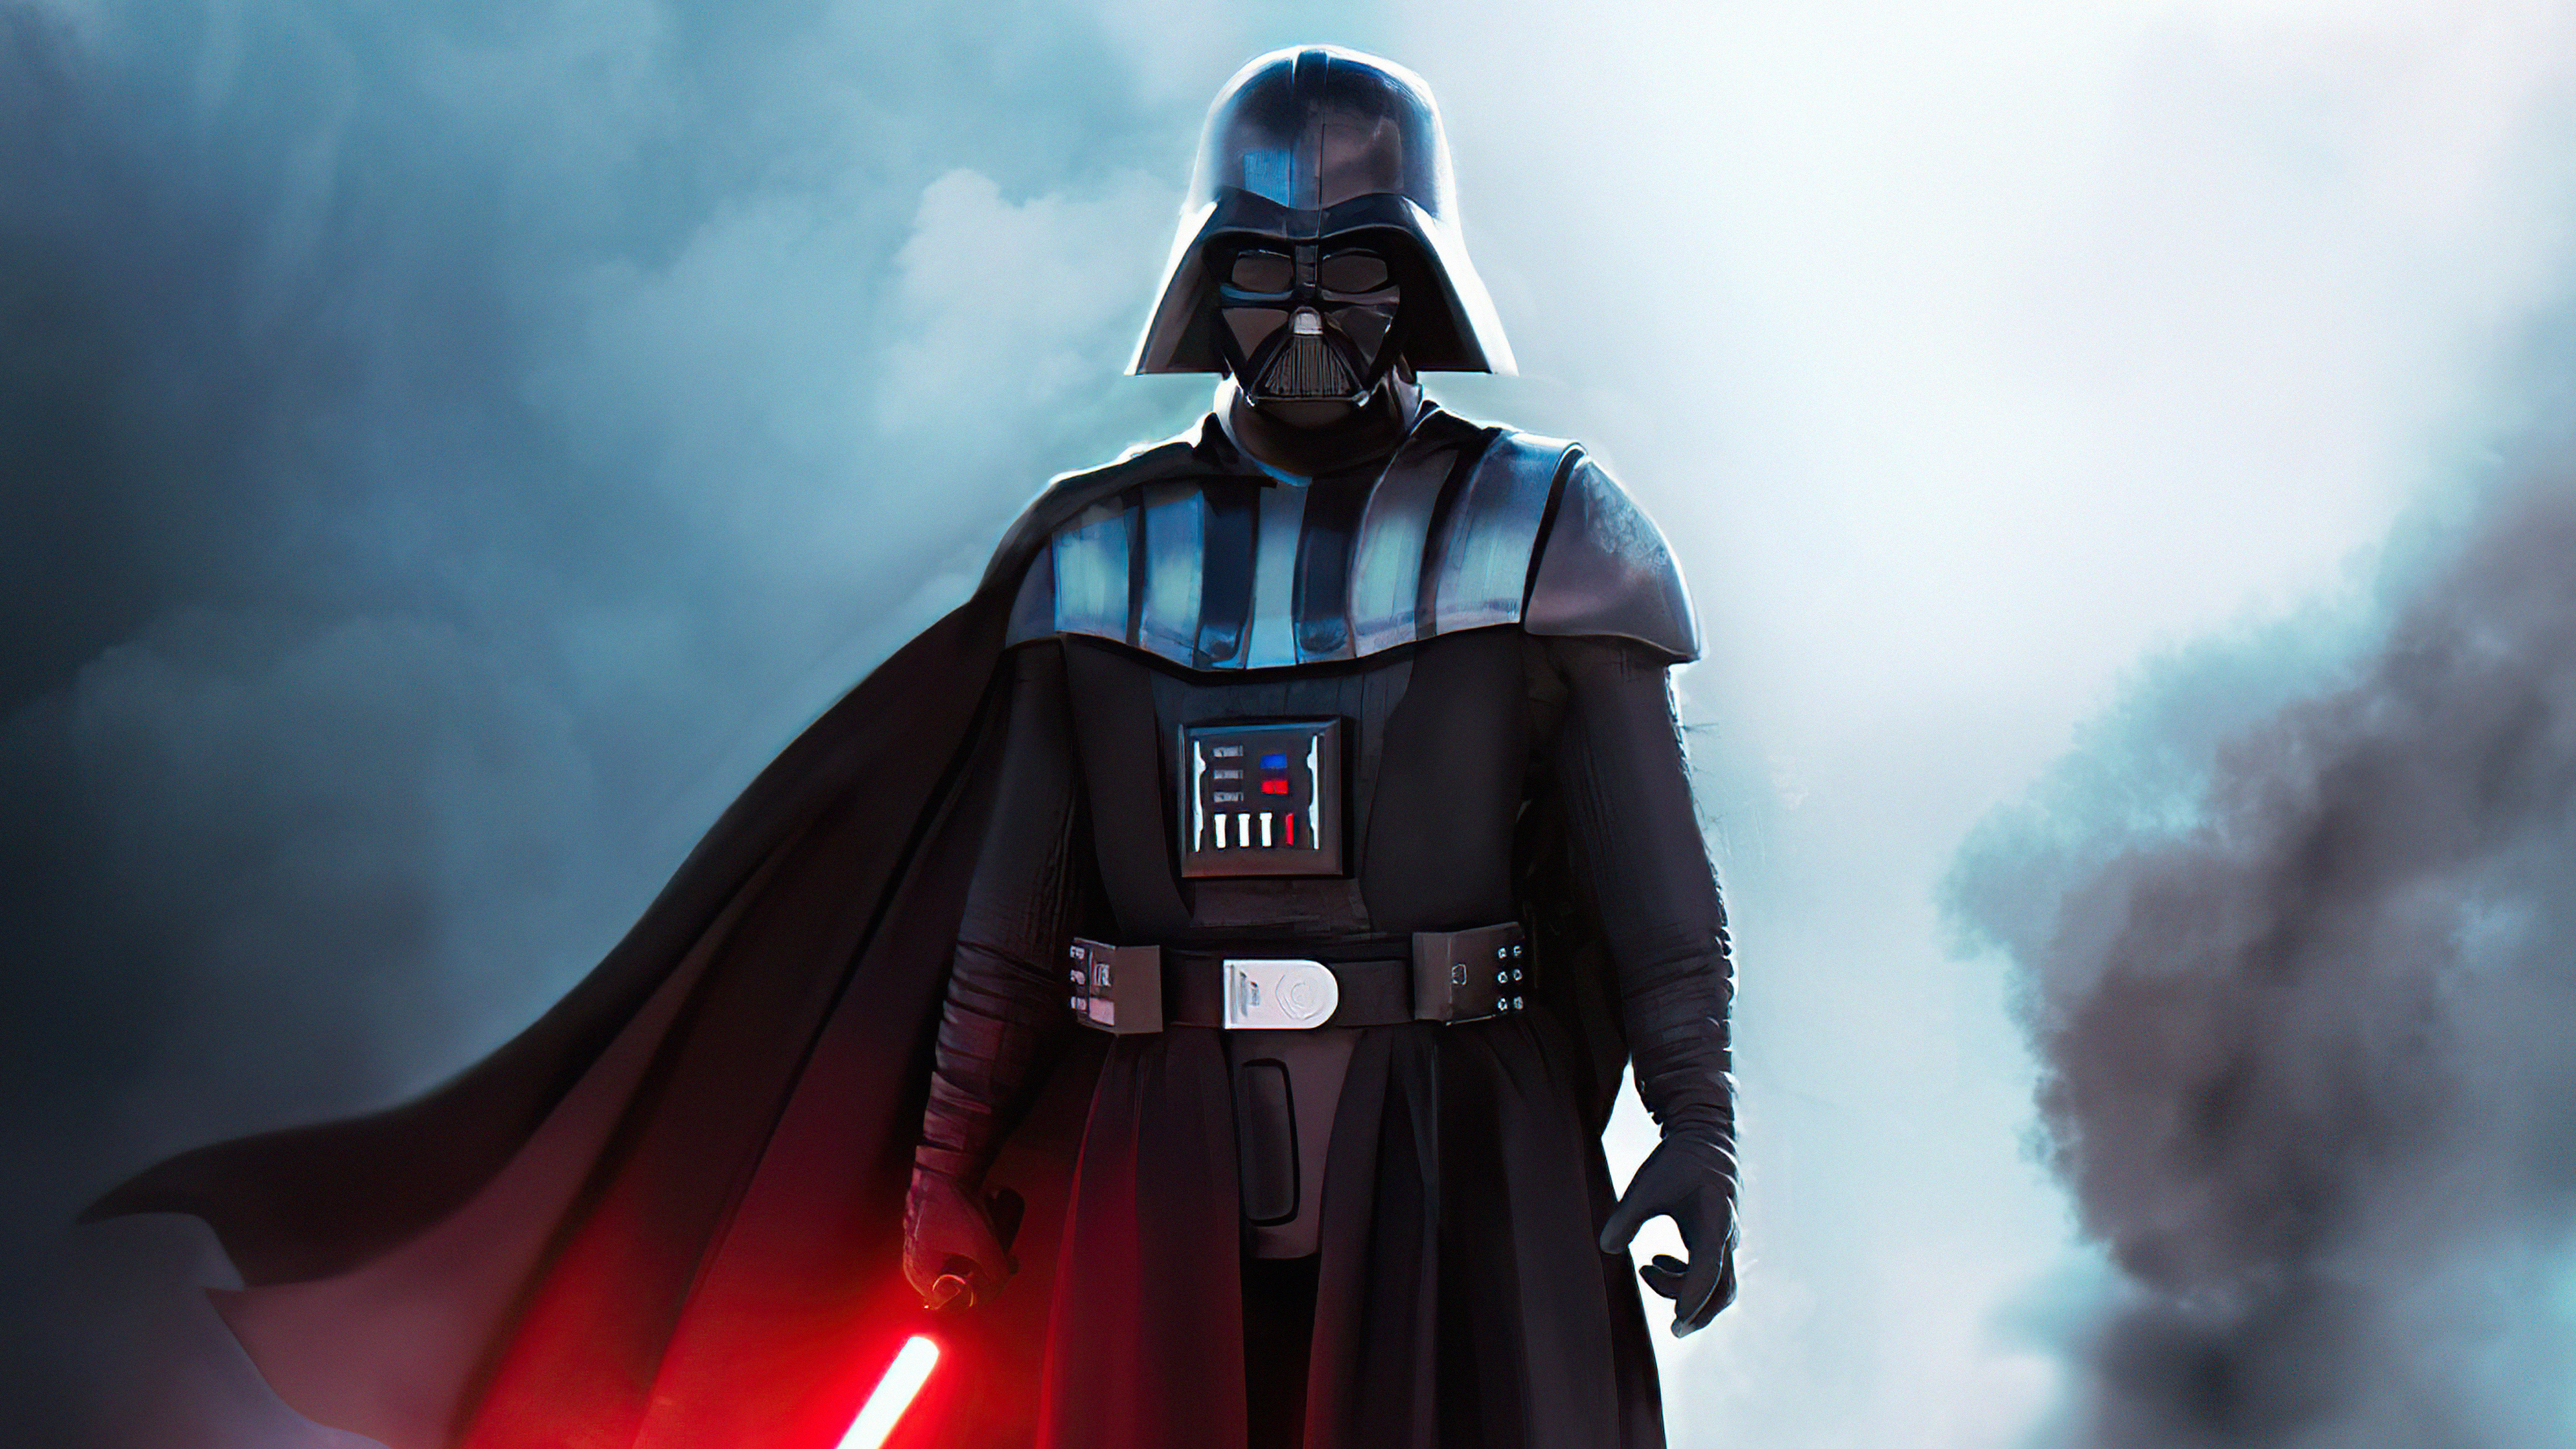 Darth Vader: A fictional character in the Star Wars franchise. 3840x2160 4K Wallpaper.